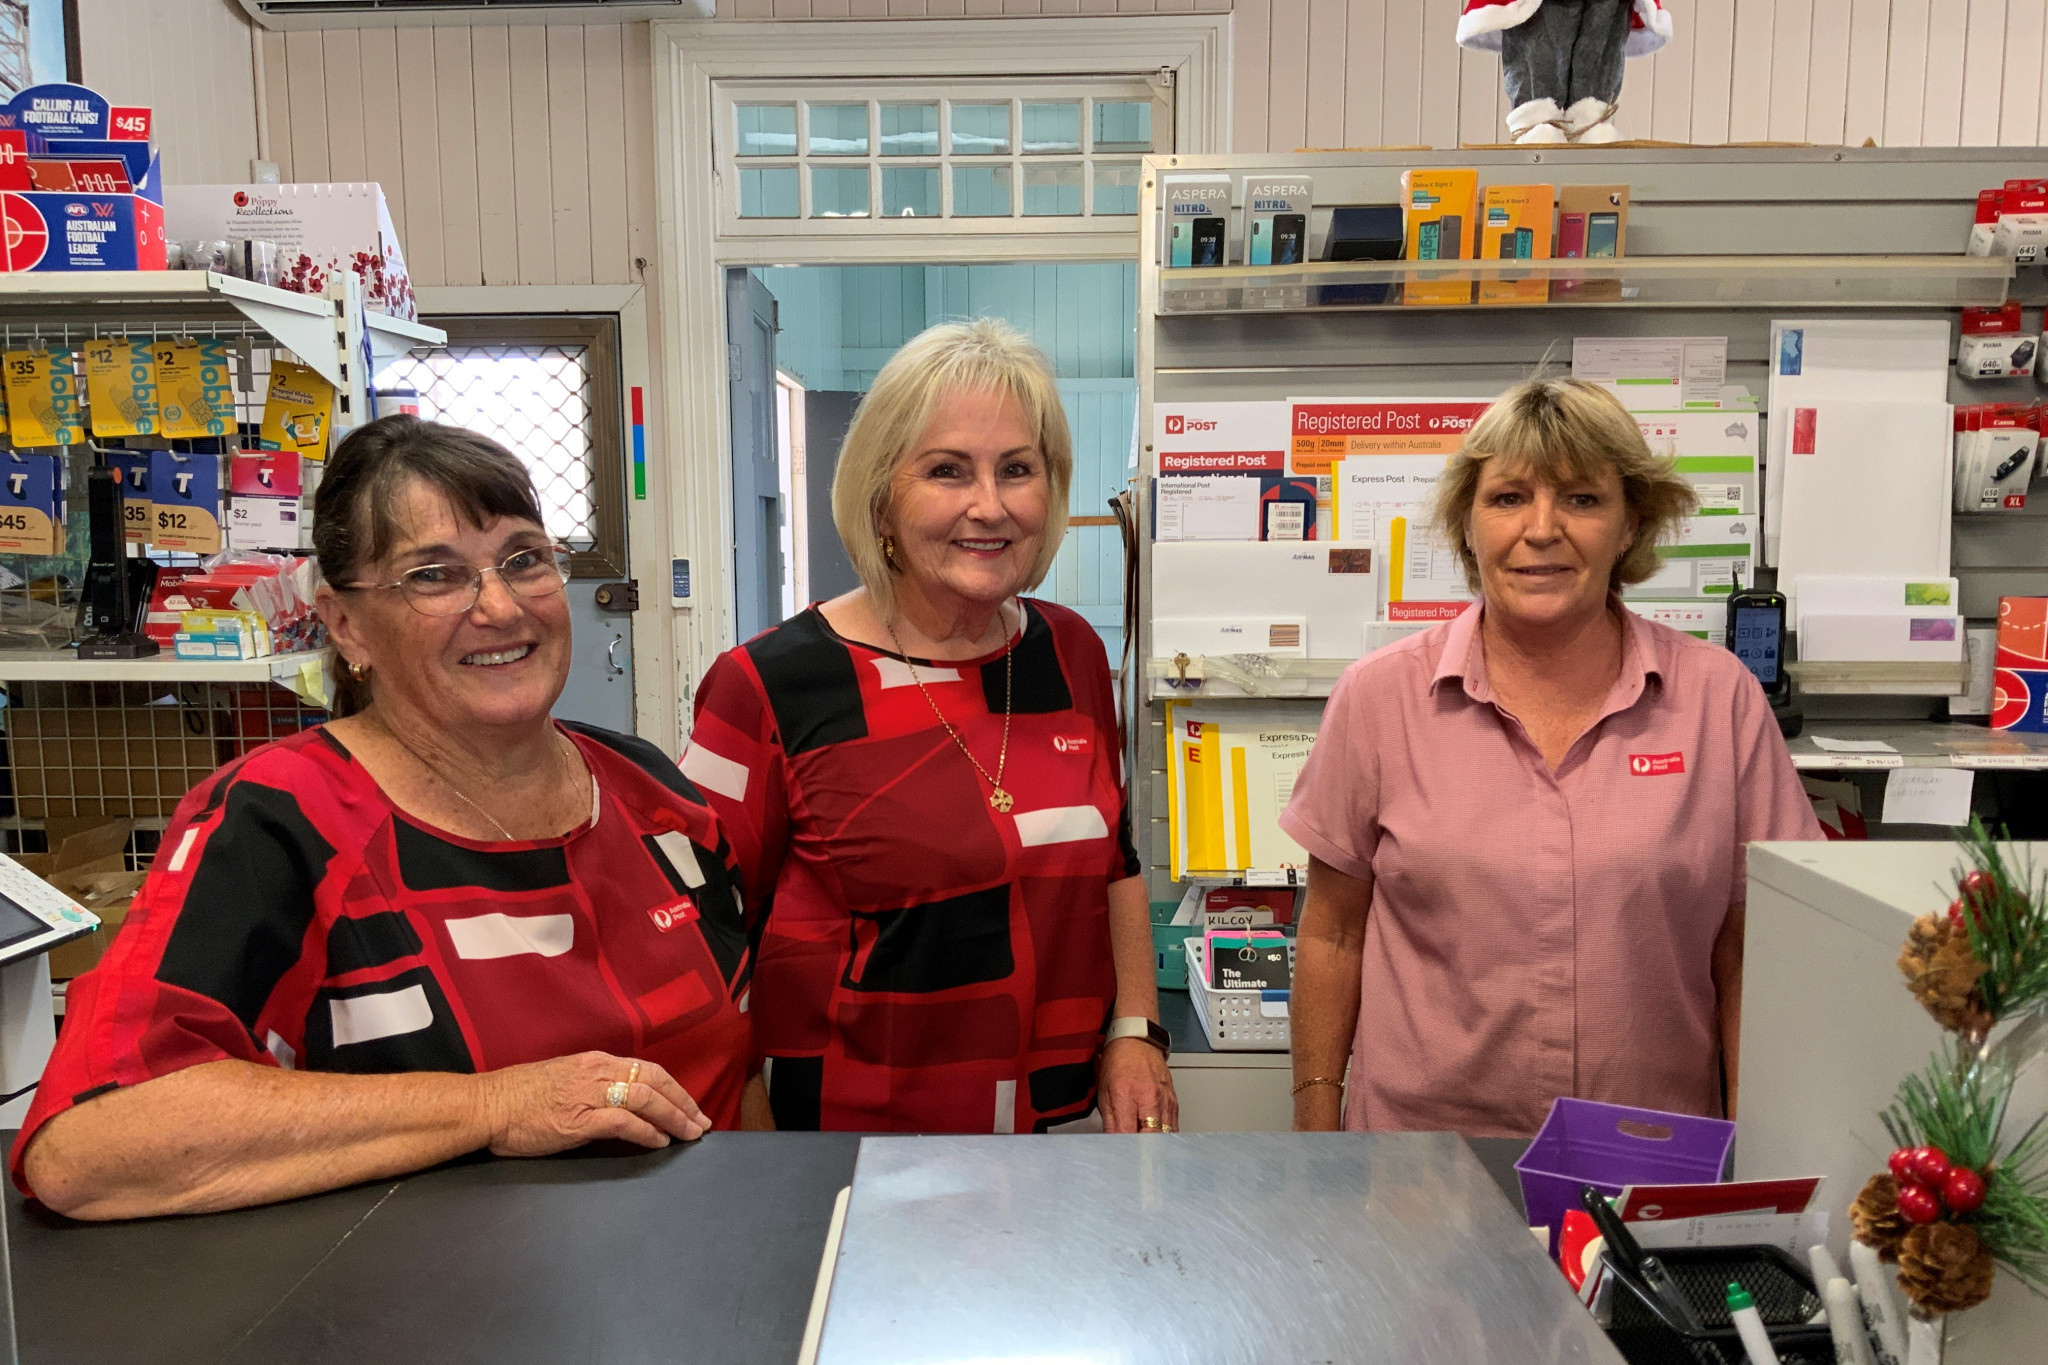 Lyn Pratt, Cath Worgan and Janine Porter are serving the needs of the community at the Kilcoy Post Office, after a recent change in ownership.